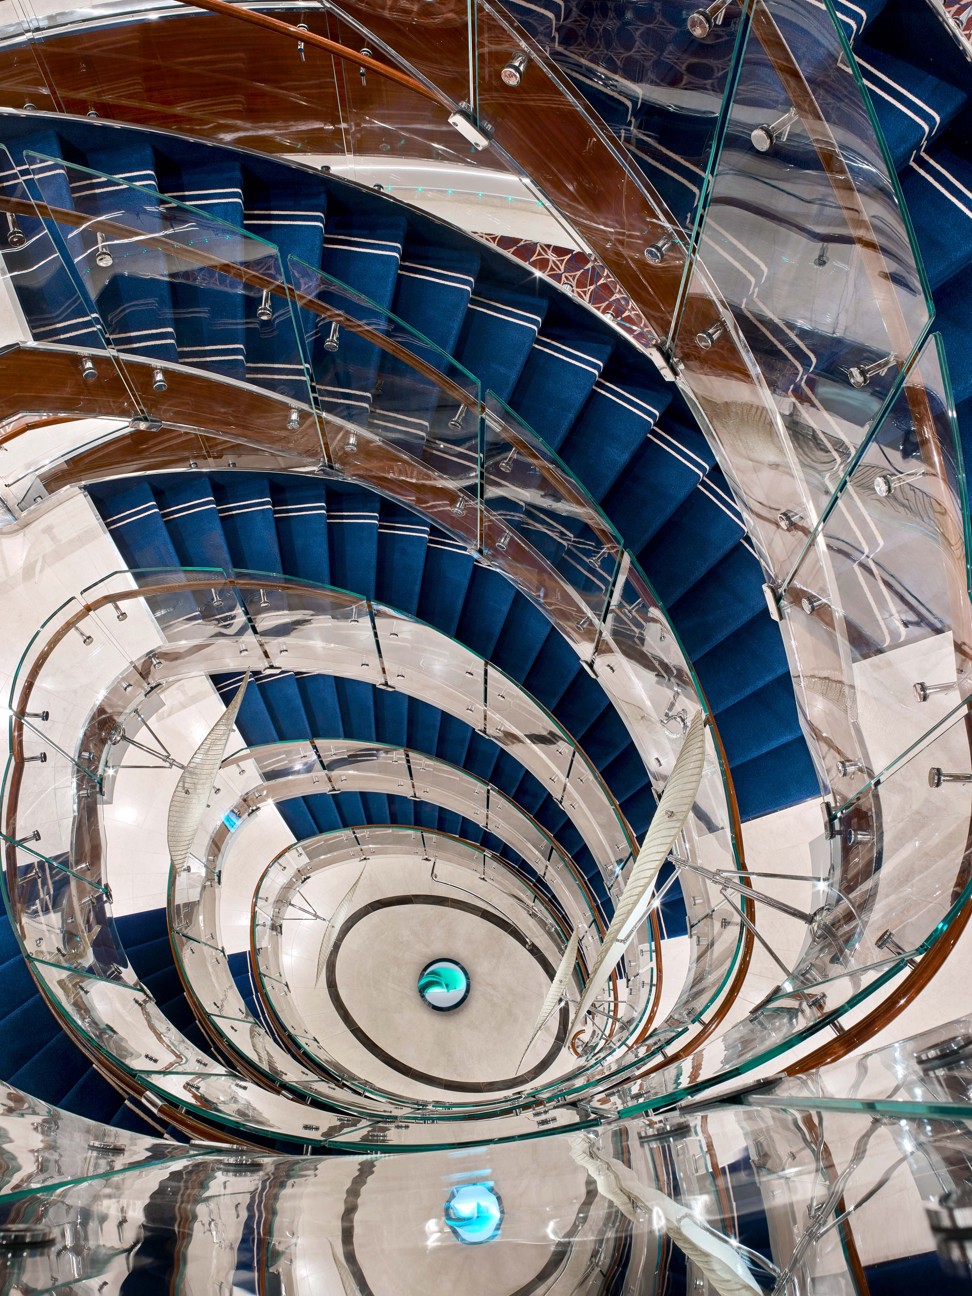 The Seabourne Encore cruise ship's spiral staircase in the atrium.